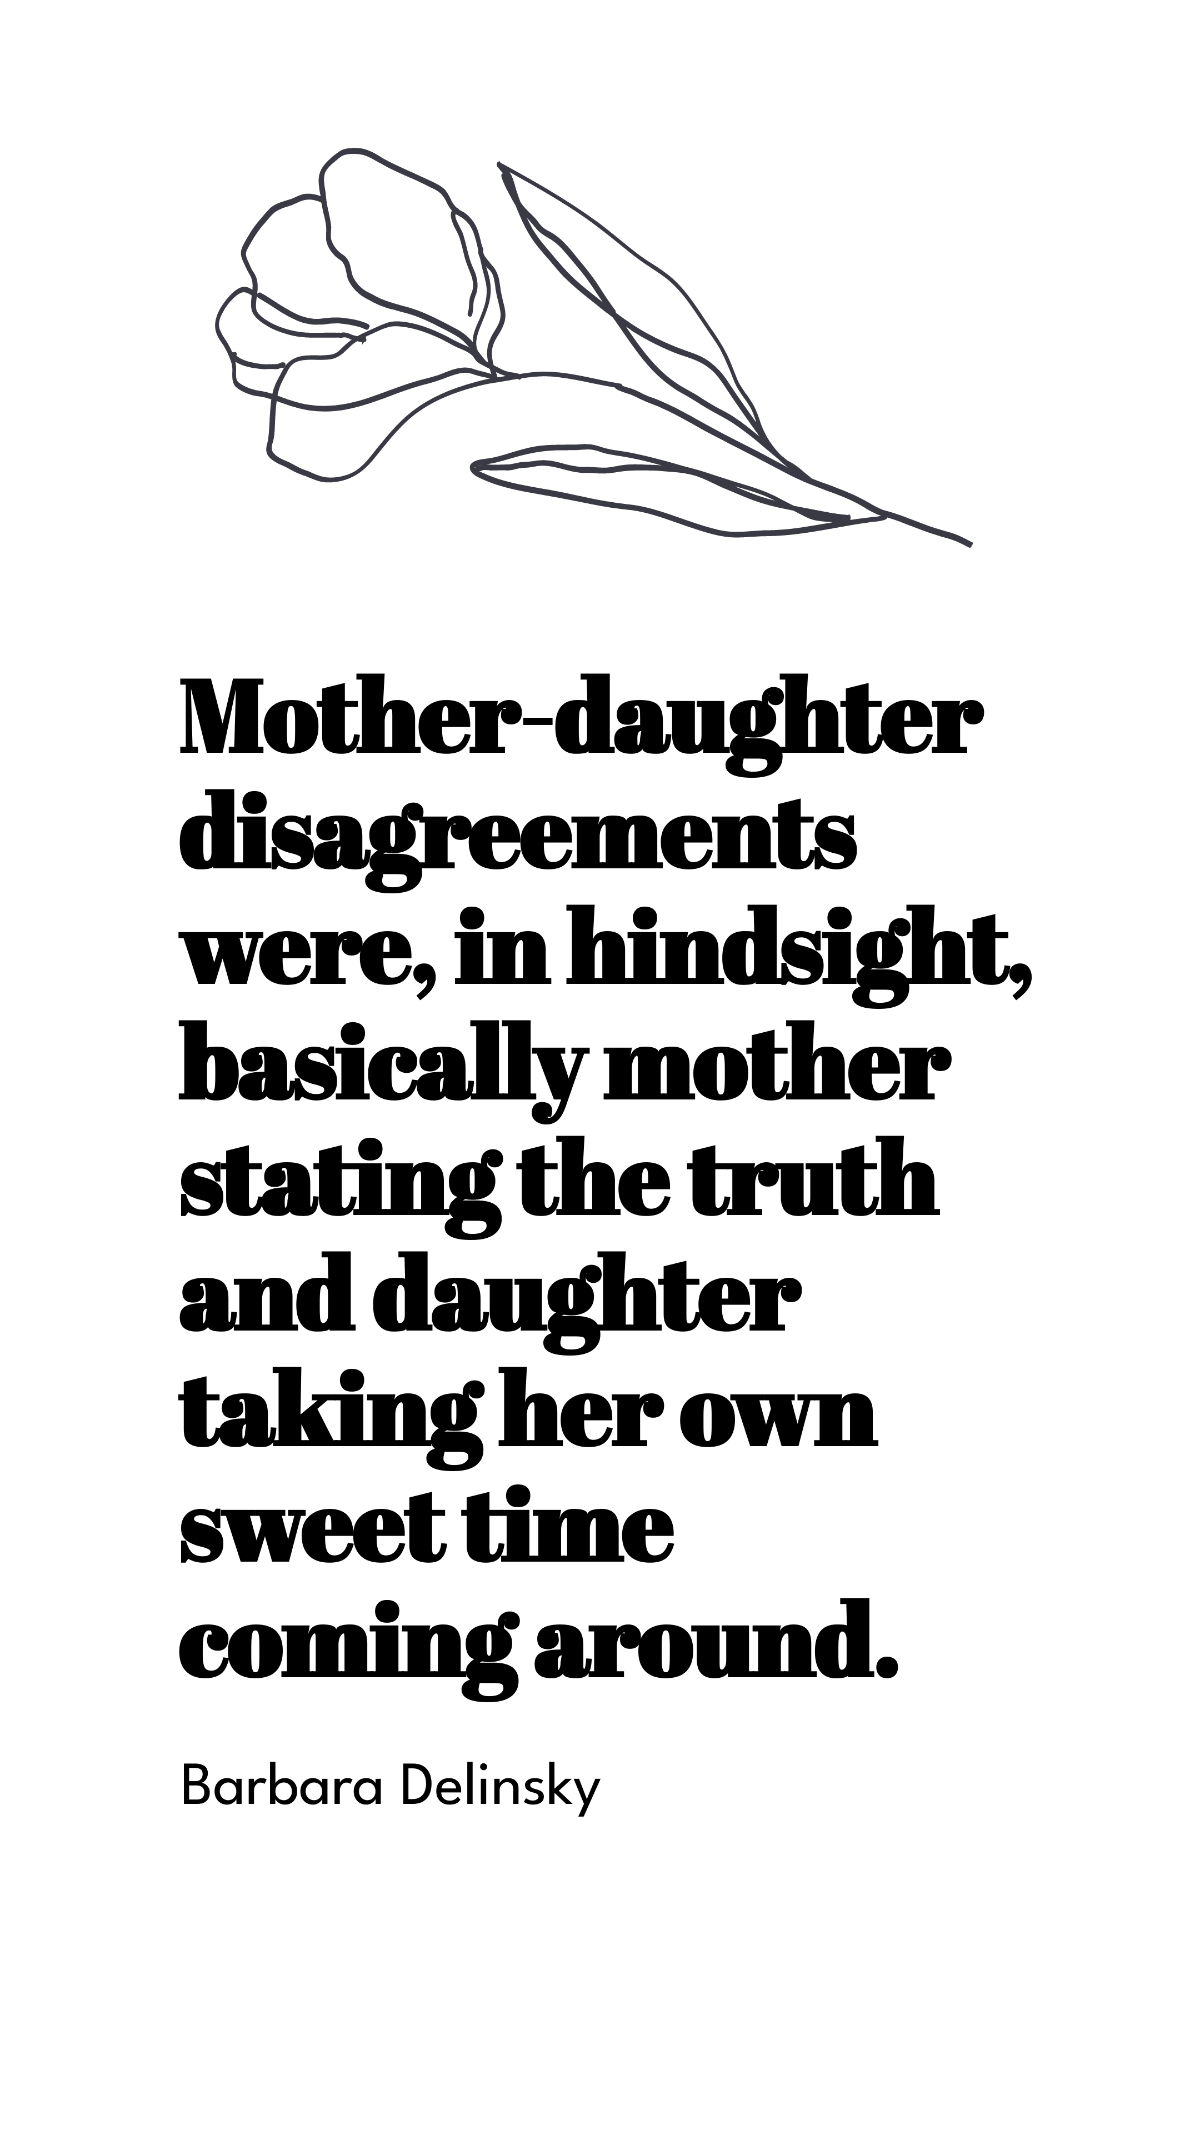 Barbara Delinsky - Mother-daughter disagreements were, in hindsight, basically mother stating the truth and daughter taking her own sweet time coming around. Template